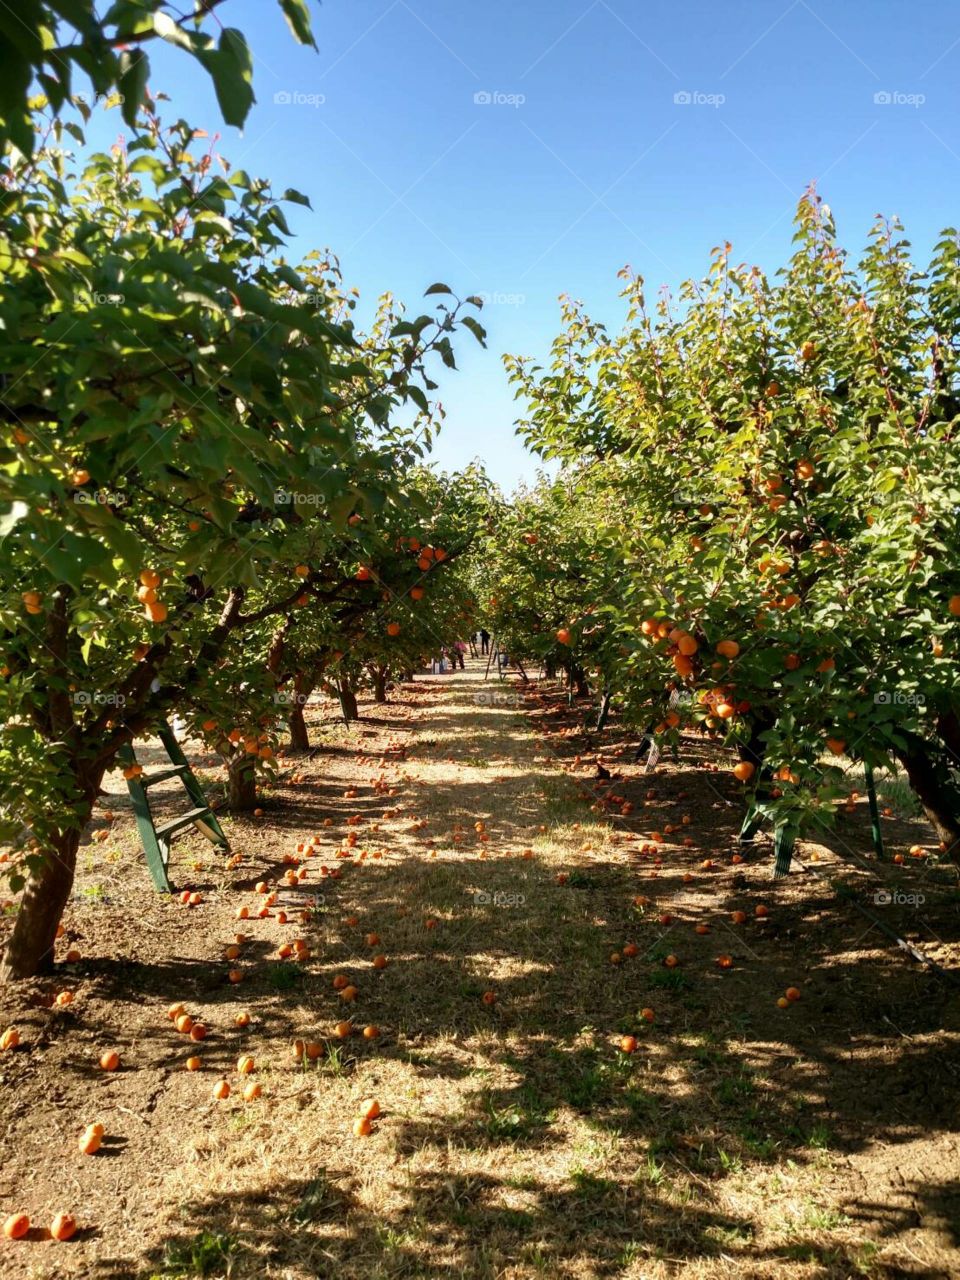 Brentwood, California, Farming, Harvesting, Trees, In a Line, Summer, Beauty Summer Afternoon, Orchard, North Bay, CA, Blooming, Fruits, Apricots, Sunny, Harvest Time, Produce, Picking, Nature Produce to be enjoyed 